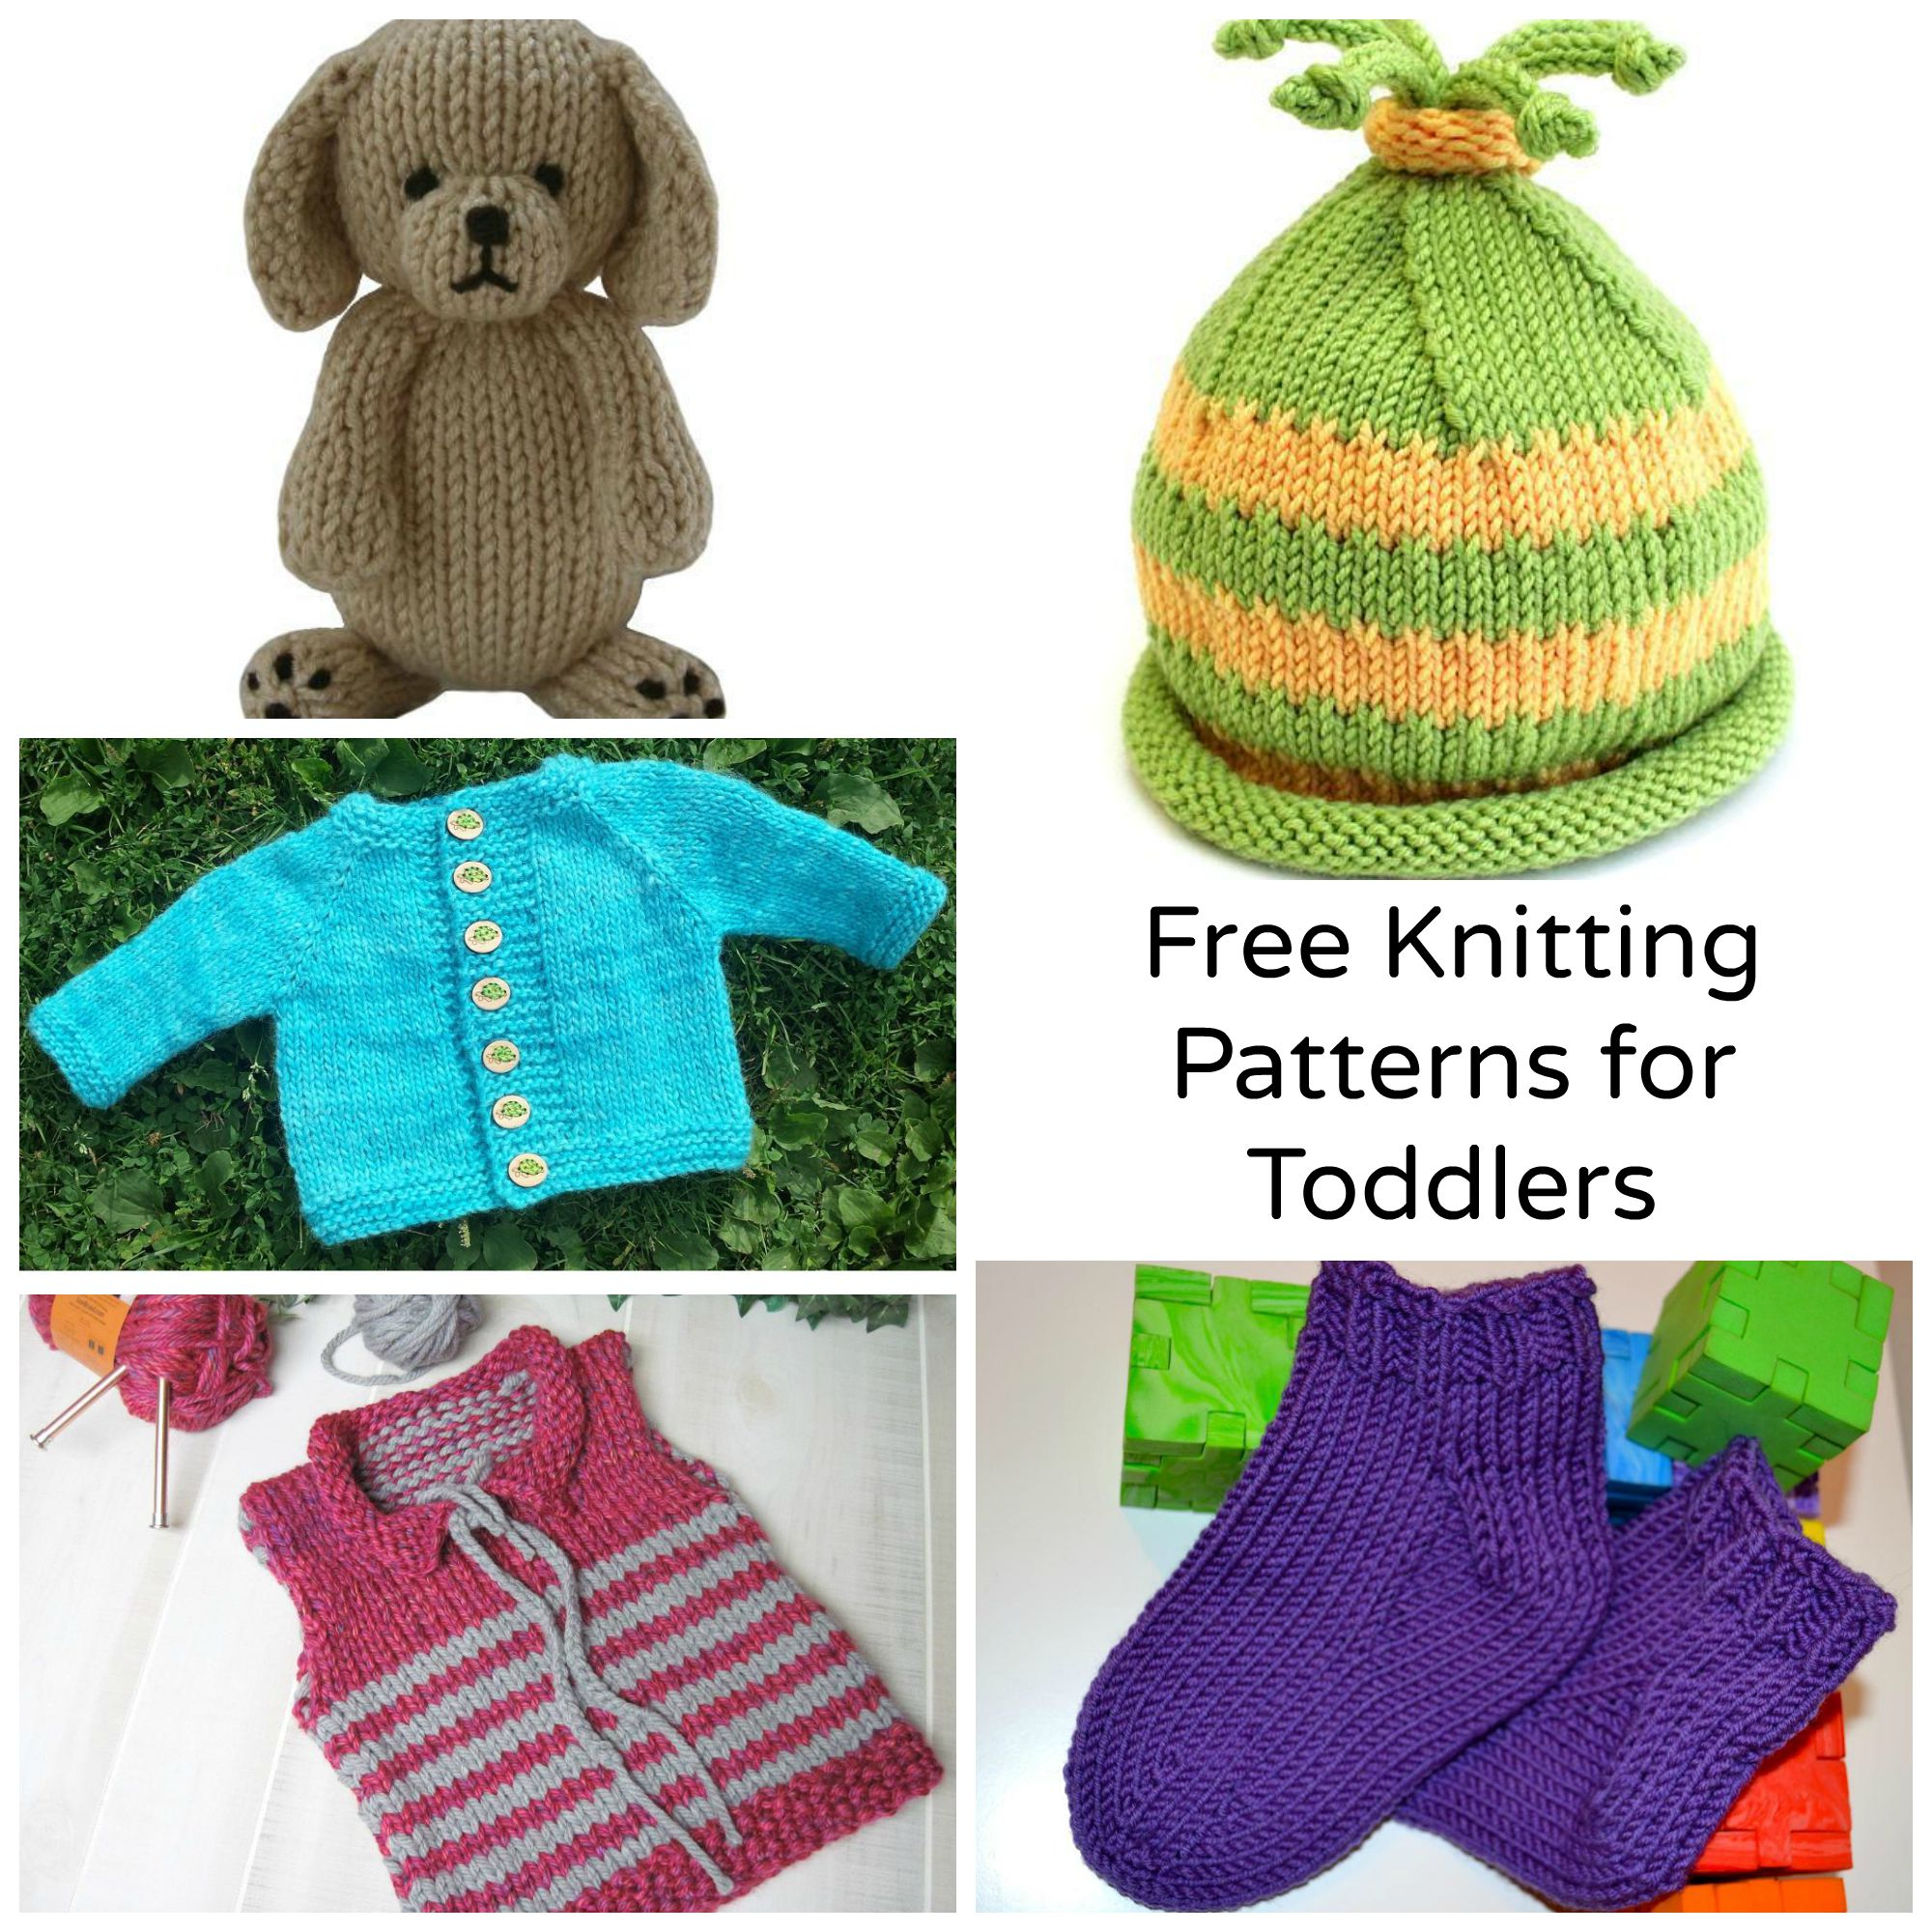 Free Knitting Patterns Babies 7 Sweet Free Knitting Patterns For Toddlers Craftsy